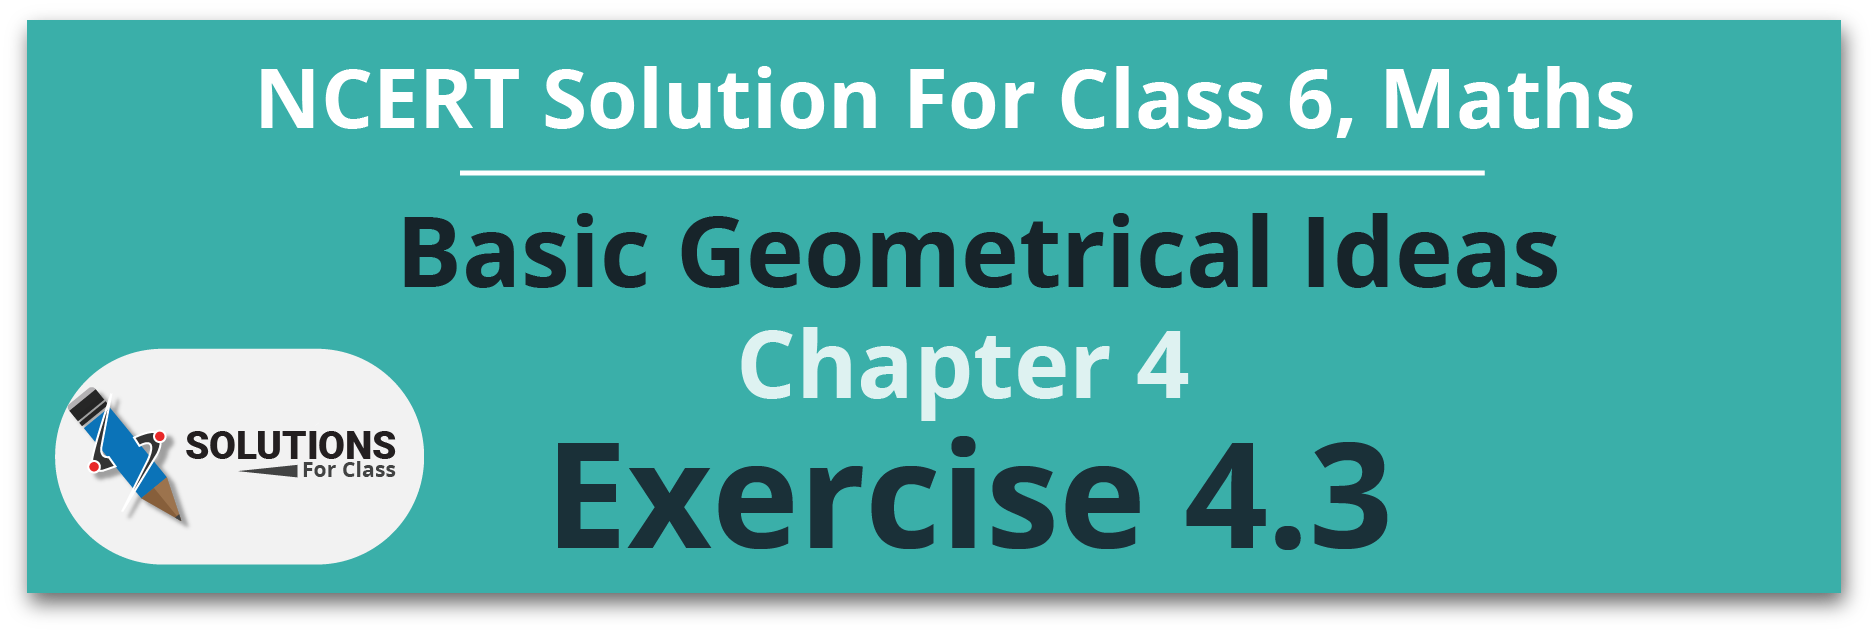 NCERT Solutions For Class 6 Maths, Chapter 4, Basic Geometrical Ideas, Exercise 4.3